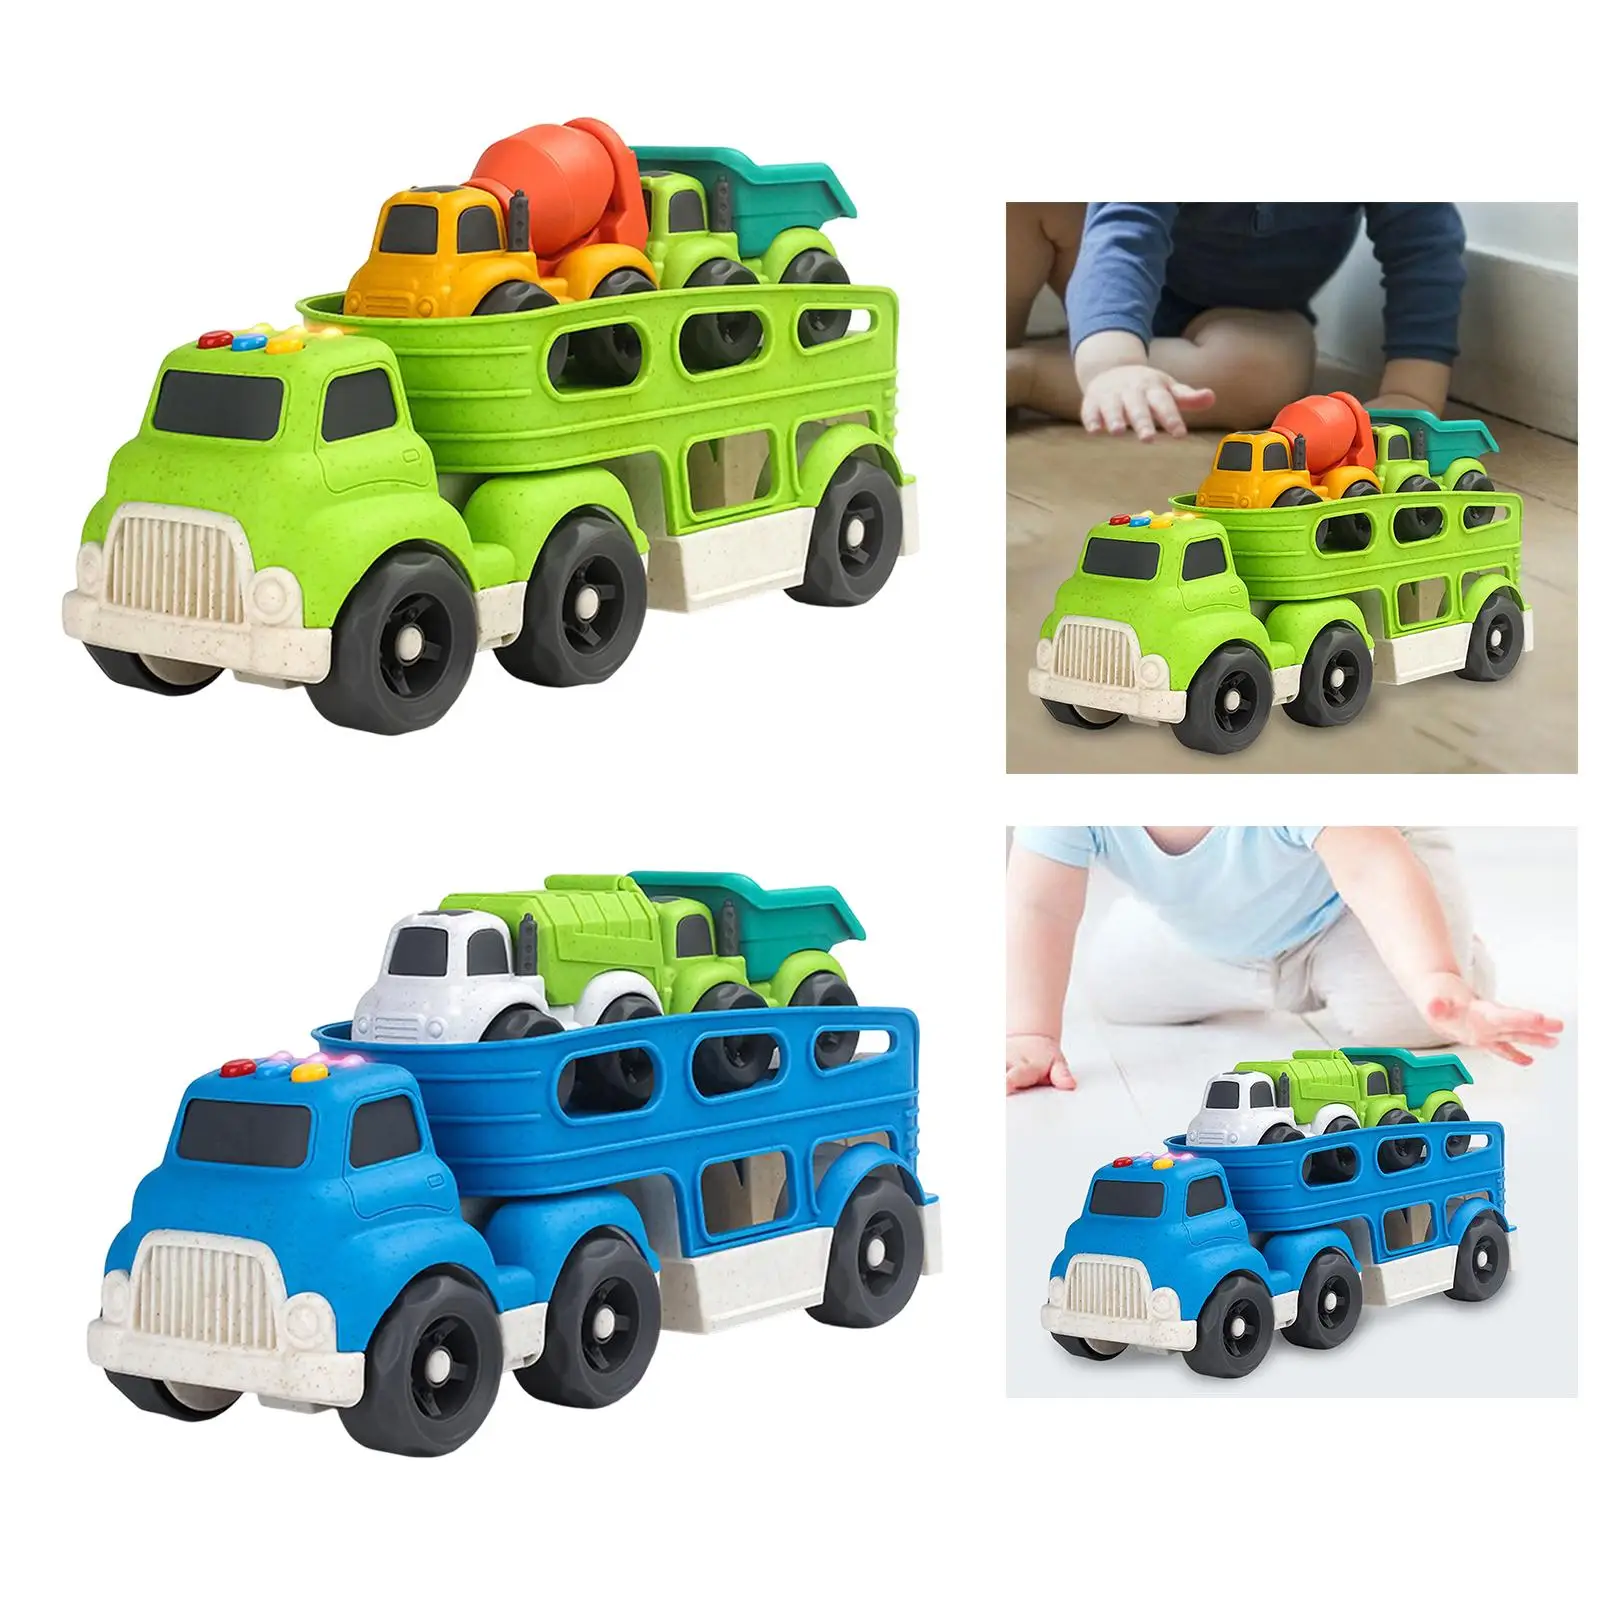 

Flat Head Transport Vehicle Double Deck Armored Vehicle Model Puzzle Sand Table Decor Toy Trucks Carrier for Children Toddler